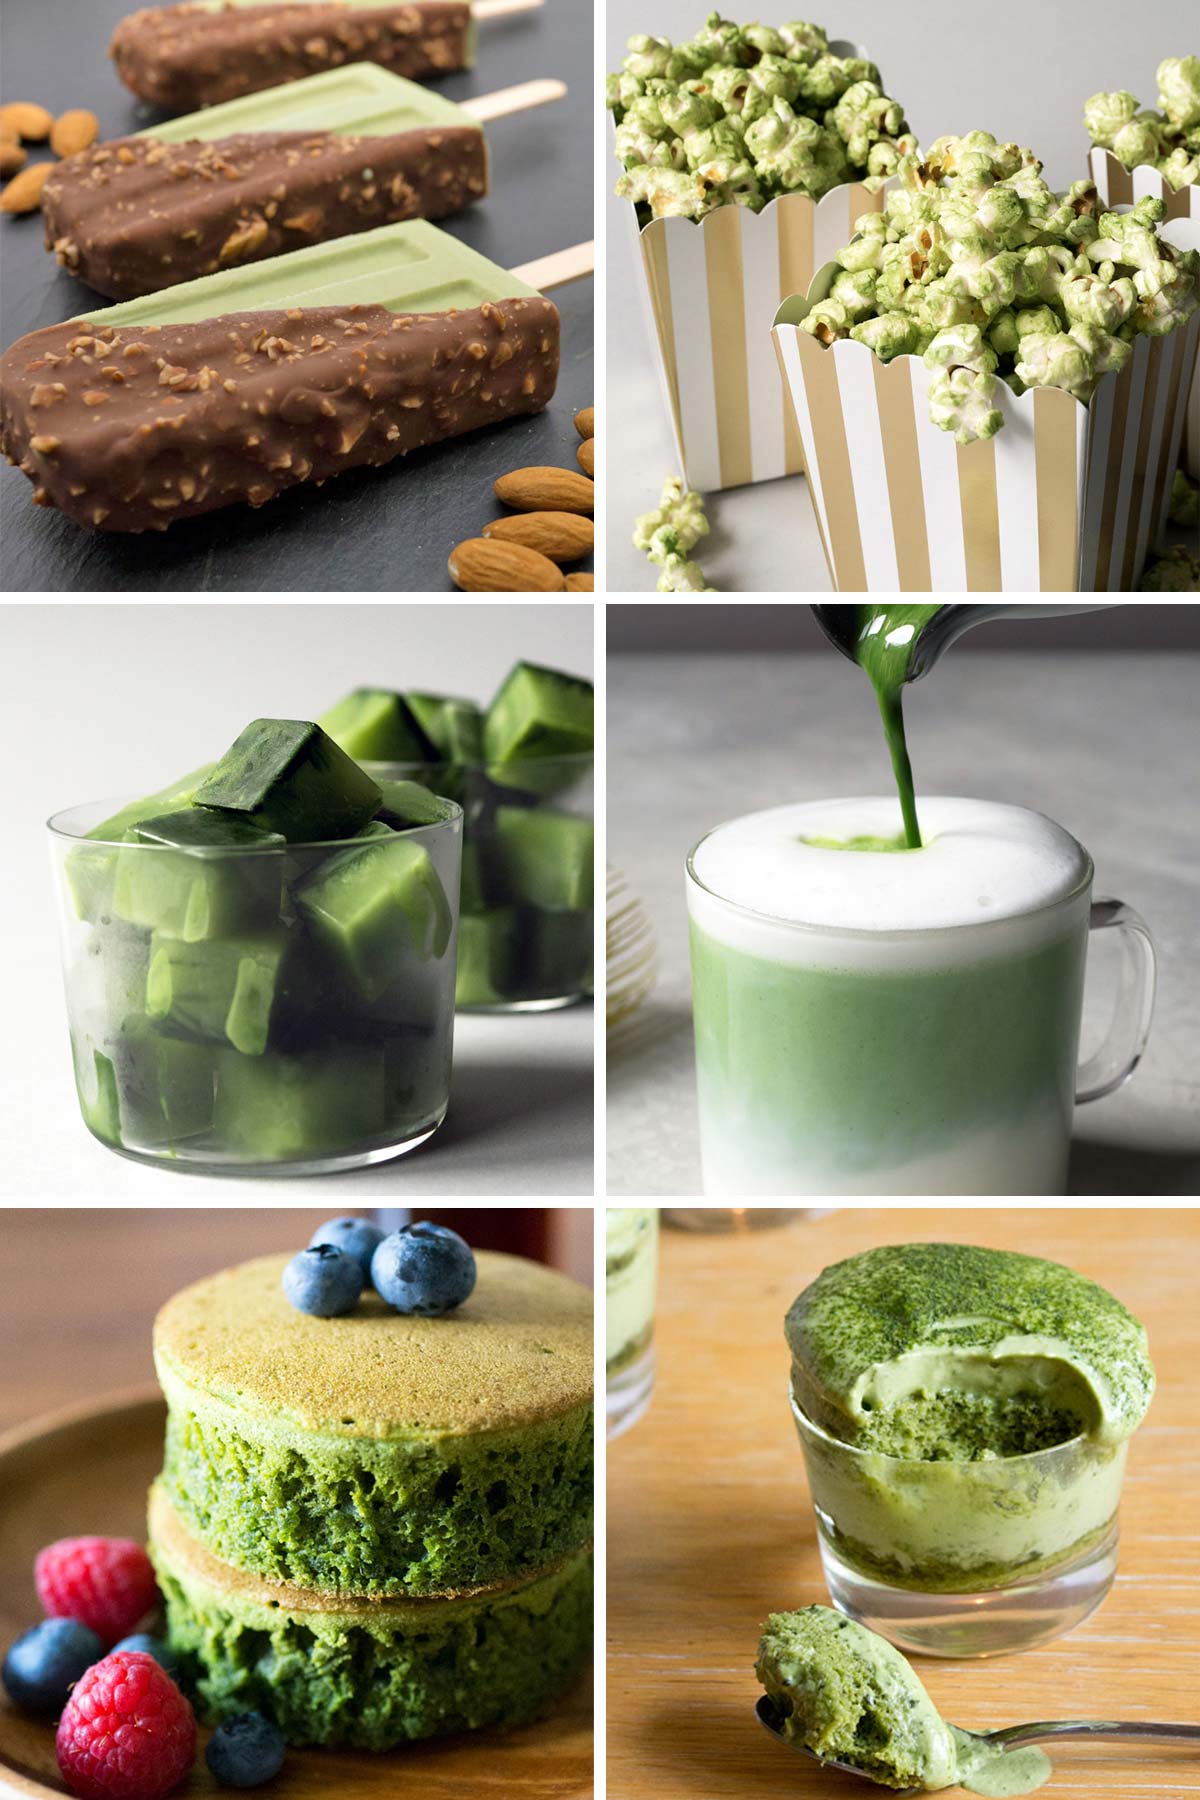 6 different foods made with matcha green tea.